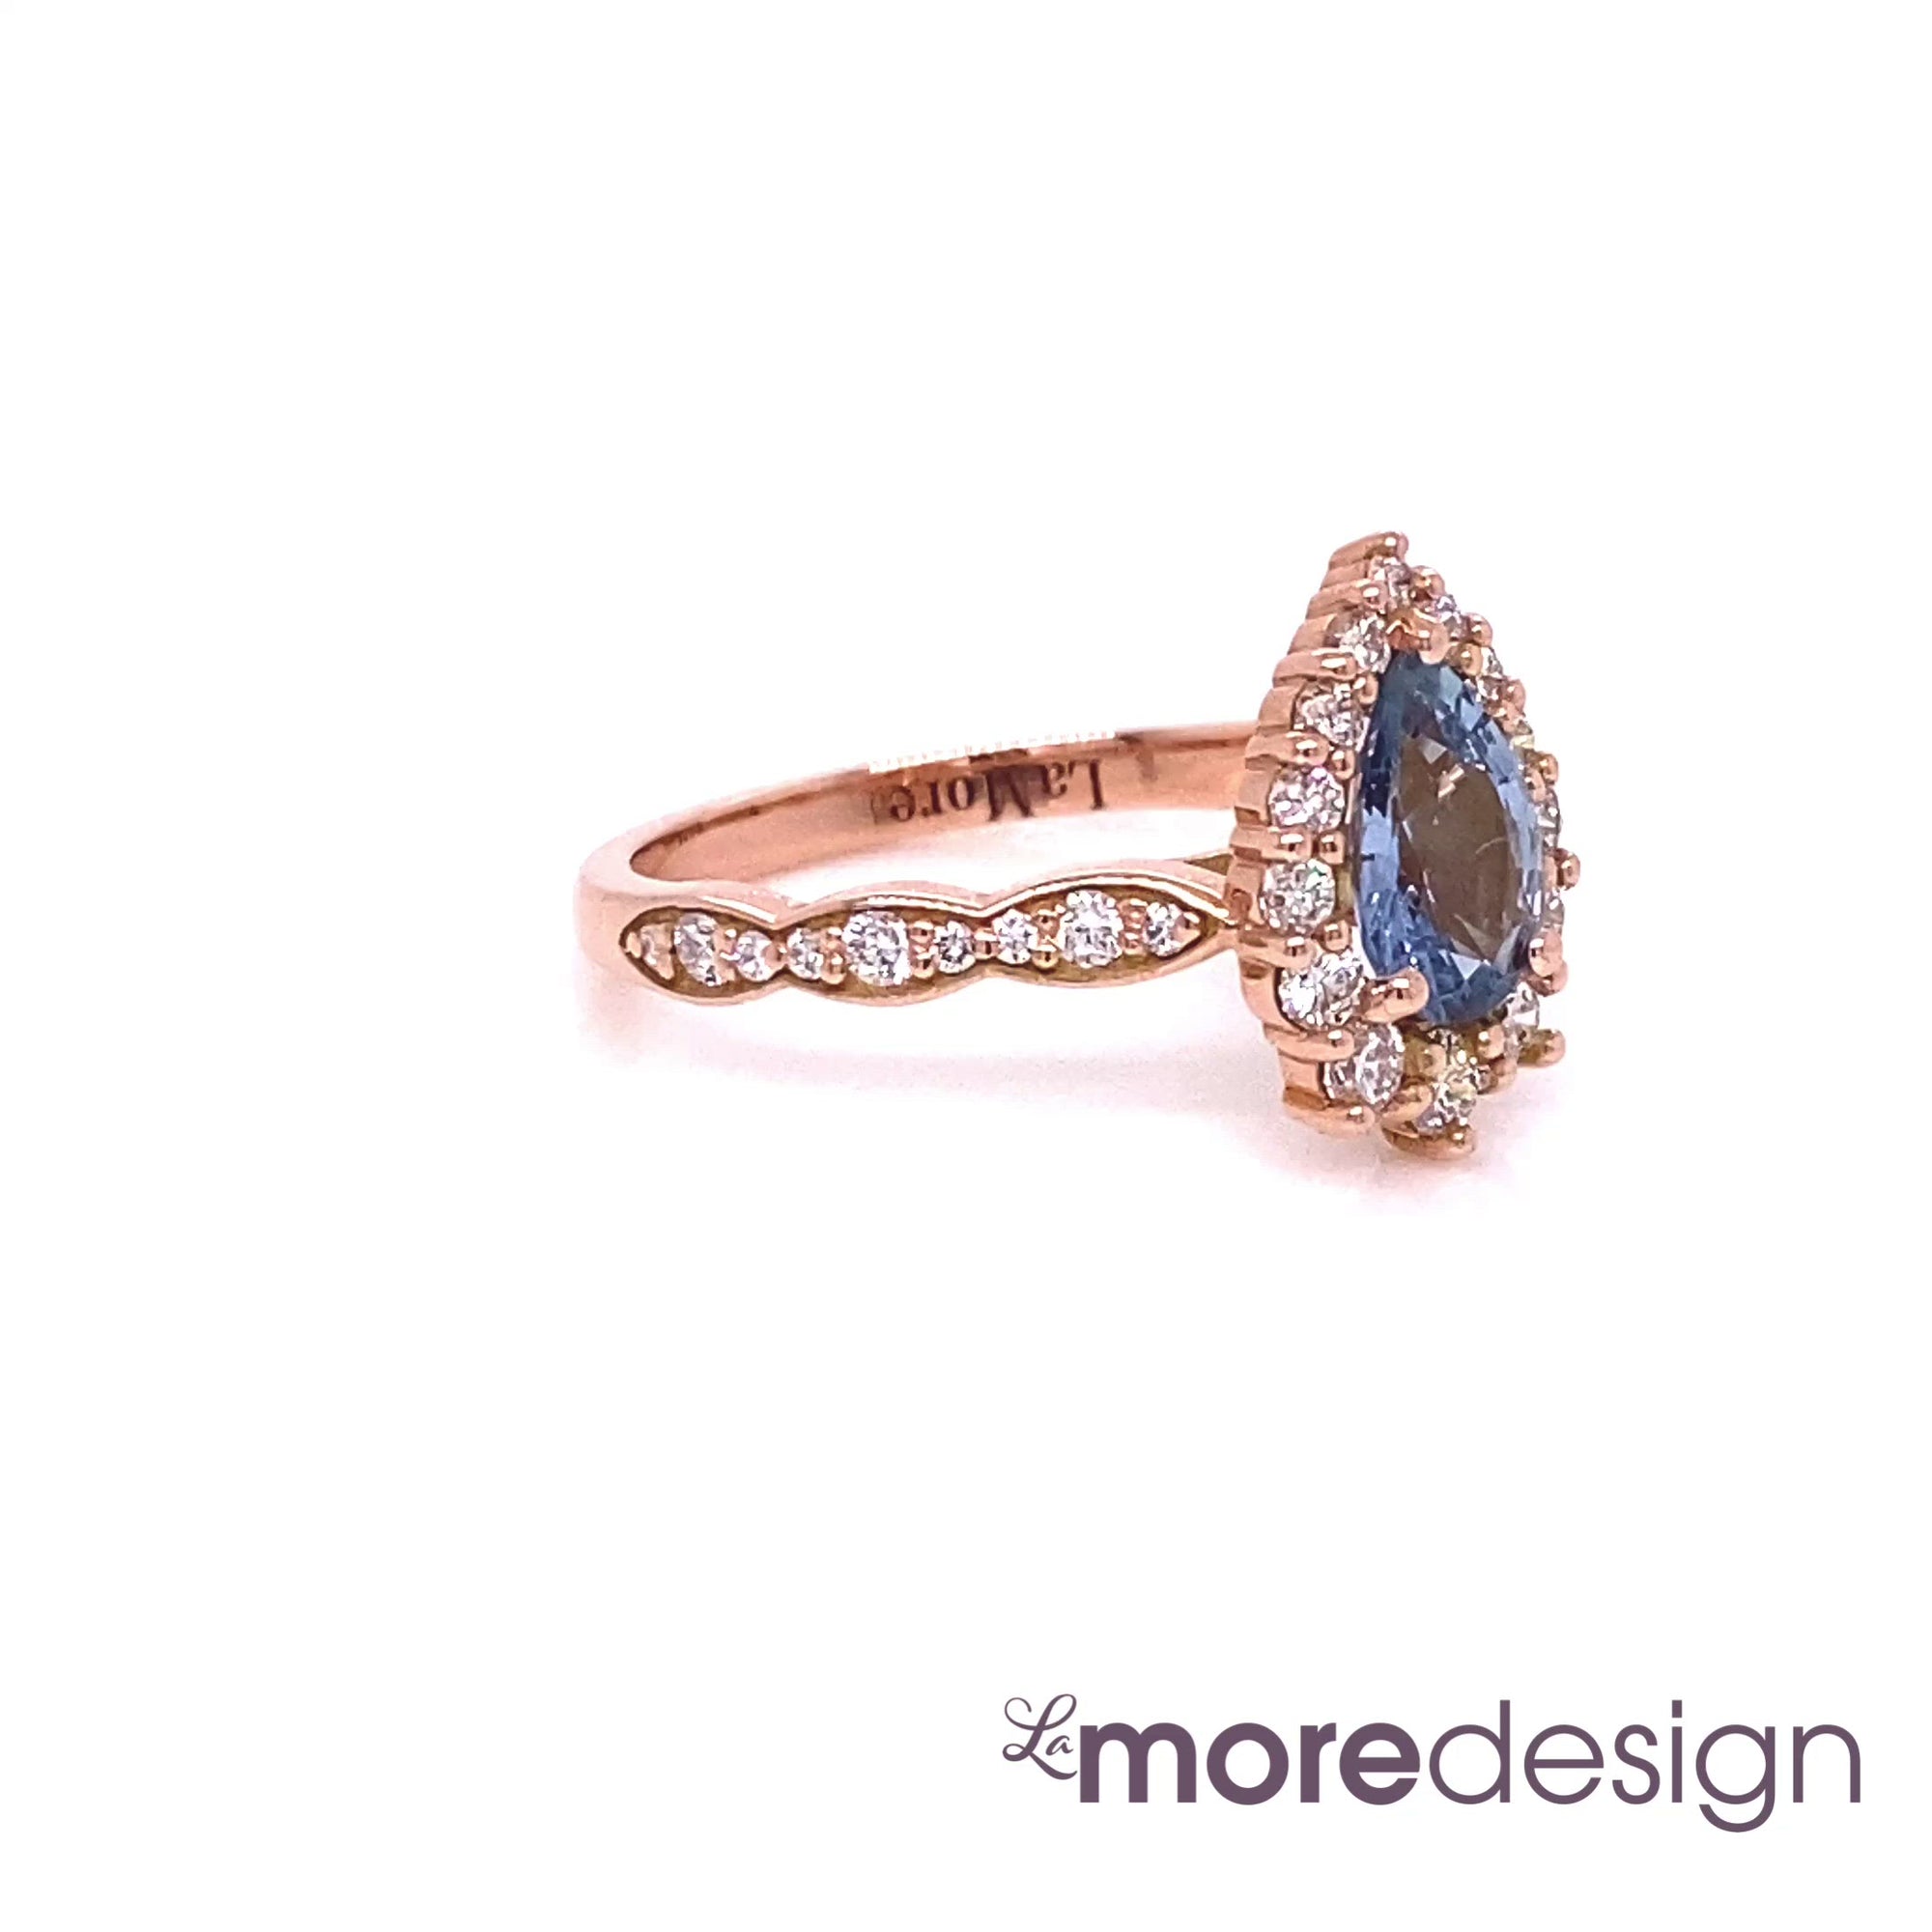 This timelessly gorgeous yet unique blue sapphire engagement ring is crafted in 14k rose gold Tiara Halo Diamond ring setting with a 0.90-carat pear cut natural aqua blue sapphire center ~ the total gemstone and diamond weight of the whole ring is 1.48 ct.tw.  This one-of-a-kind sapphire ring is perfect for brides looking for non-traditional engagement rings. All our wedding bands can pair beautifully with this gorgeous tiara halo diamond blue sapphire ring!